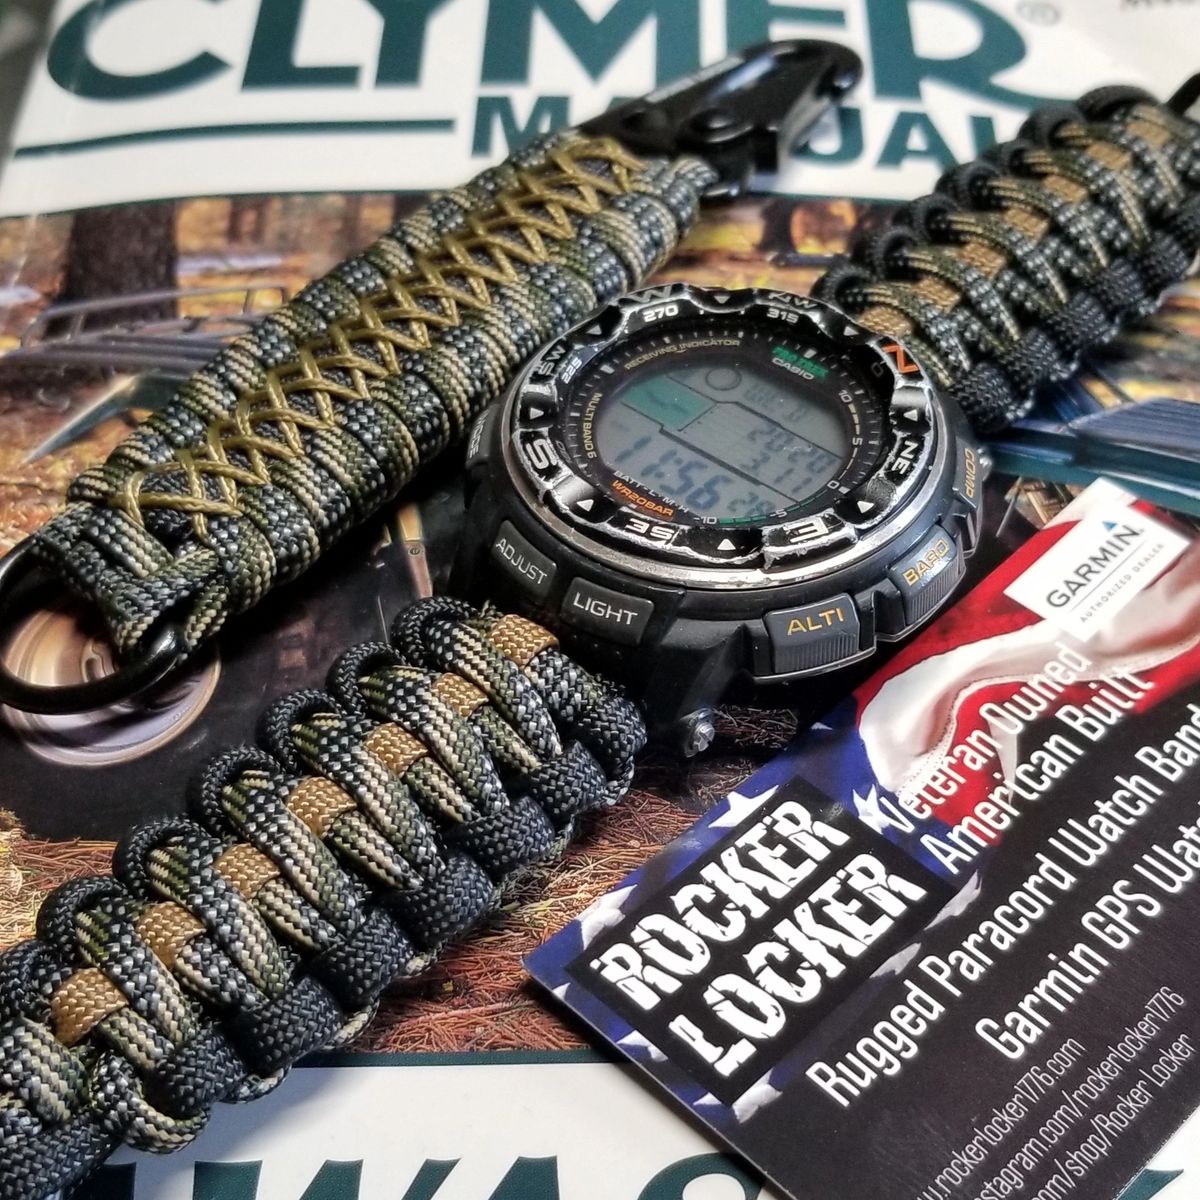 Paracord 550 Casio G-shock Adjustable Replacement Watchband W Detachable  Strap 